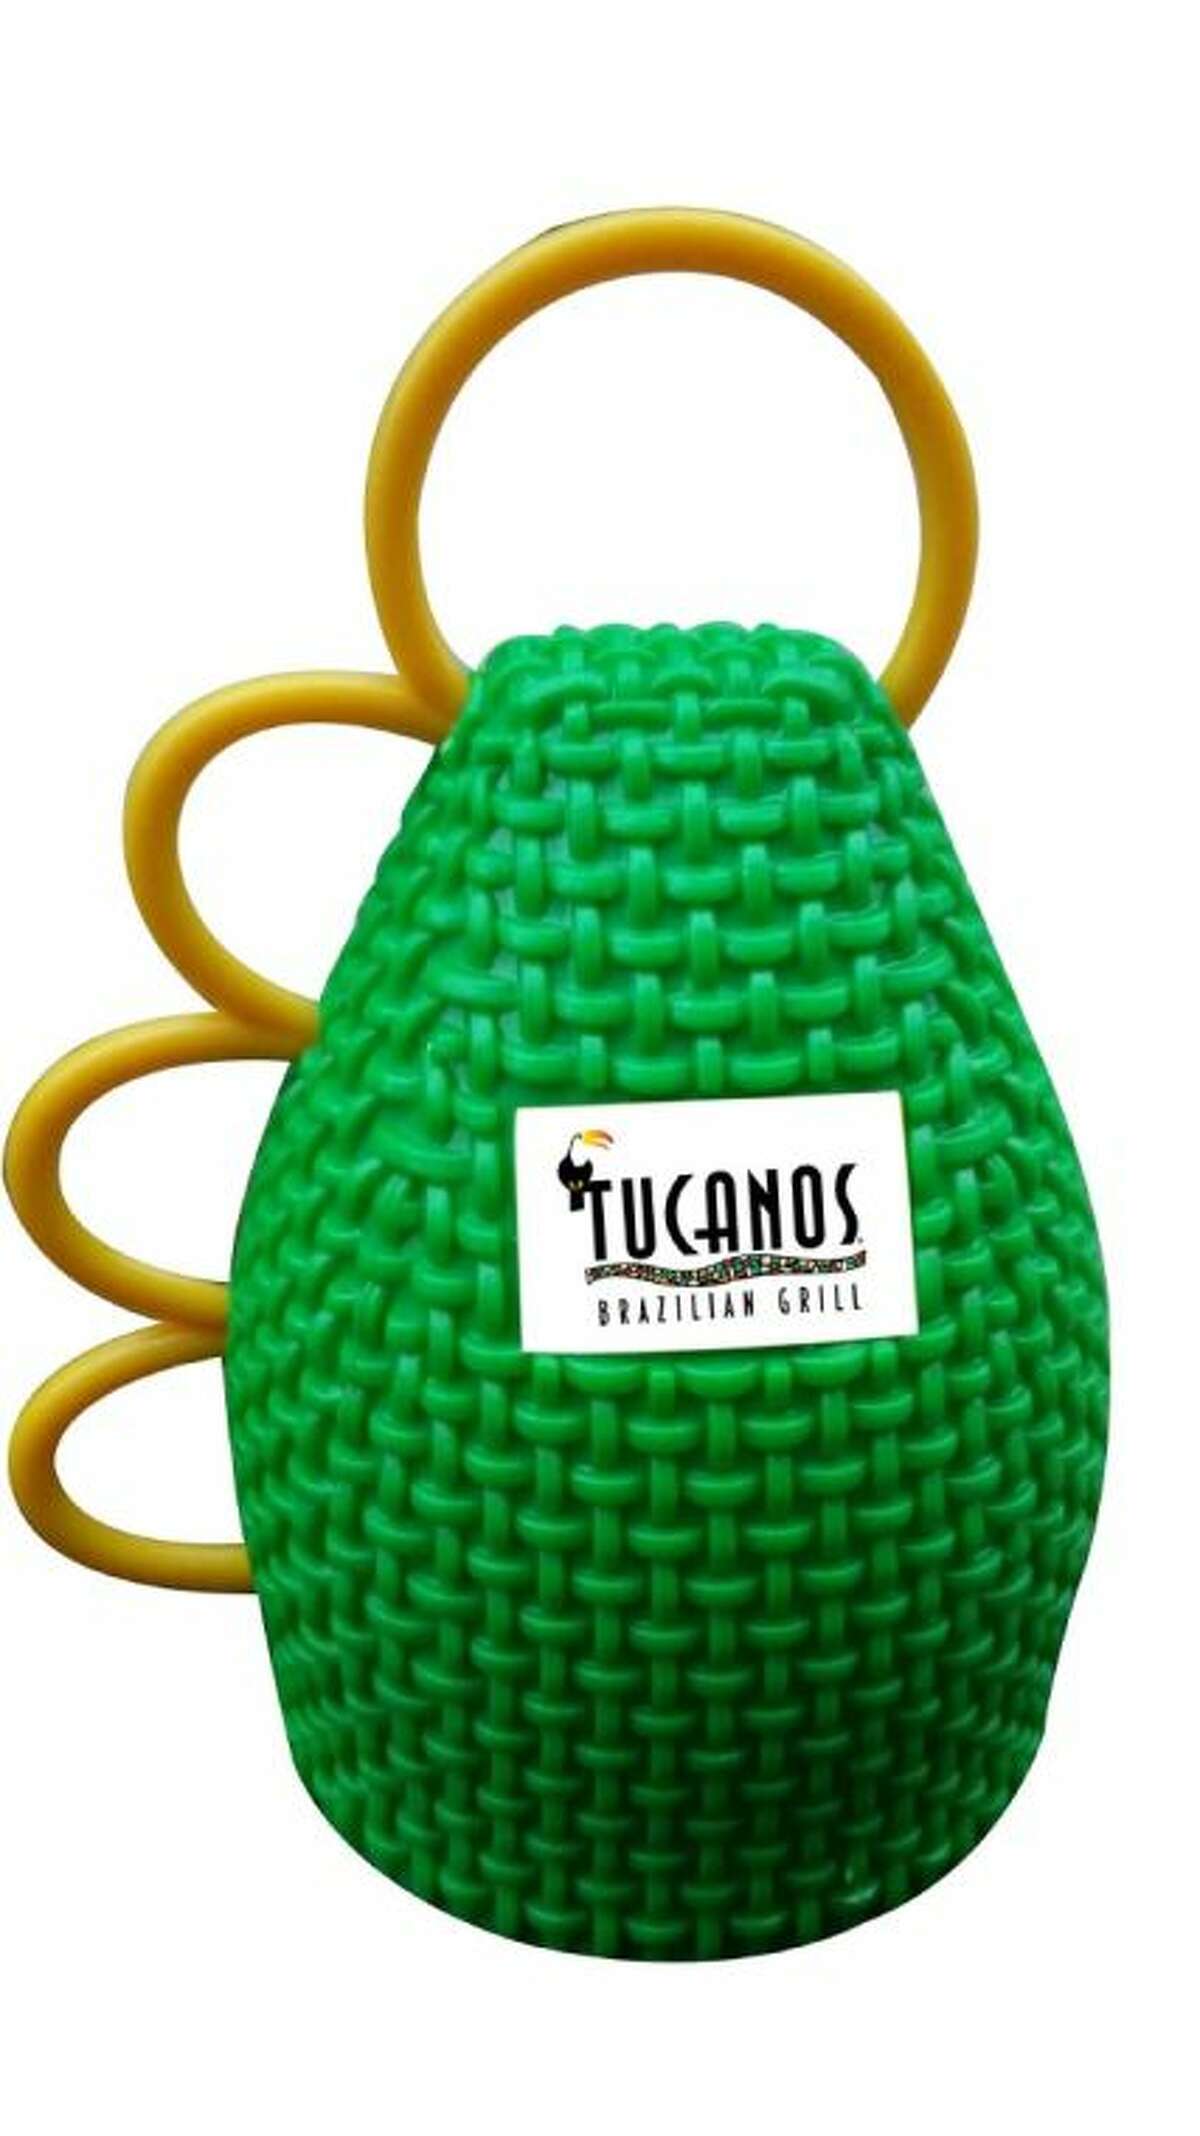 A "caxirolas" noisemaker, available for the 2014 World Cup from Tucanos Brazilian Grill at First Colony Mall in Sugar Land.